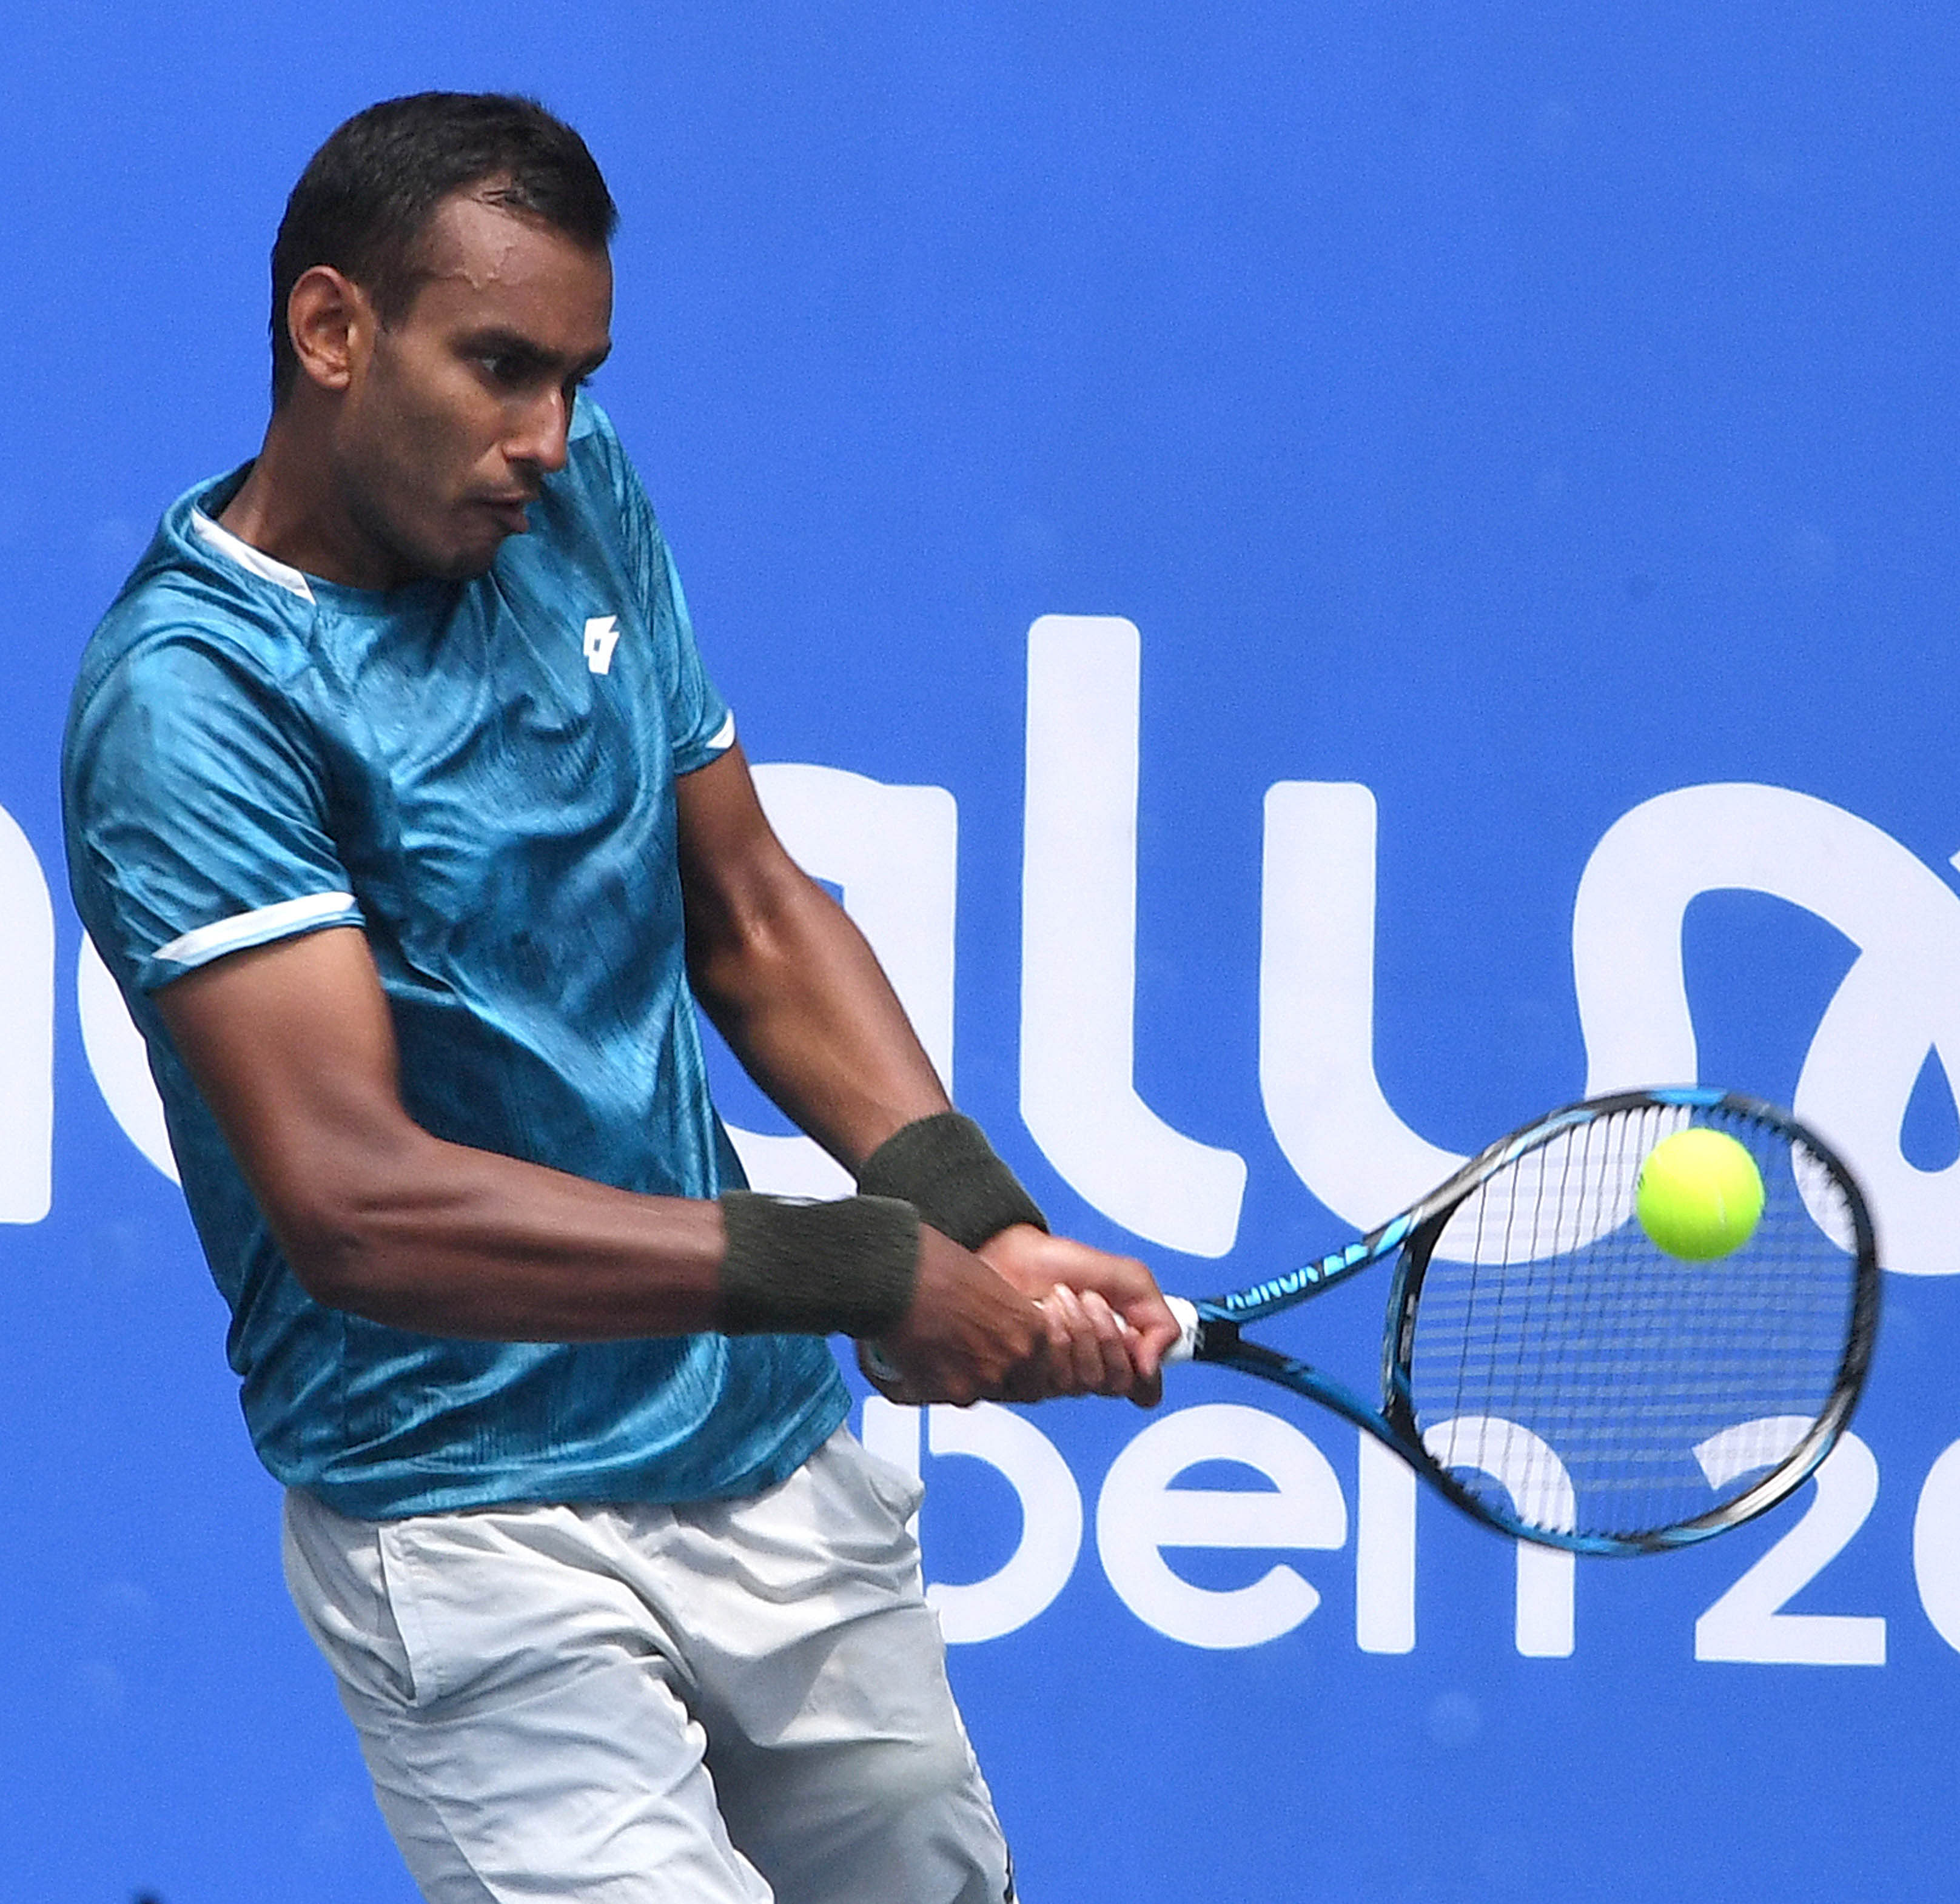 Sasikumar Mukund of India in action and won against Biaz Kavcic of SLO during the 1at round of the Bengaluru Open 2020 at KSLTA courts in Bengauru. (DH Photo)